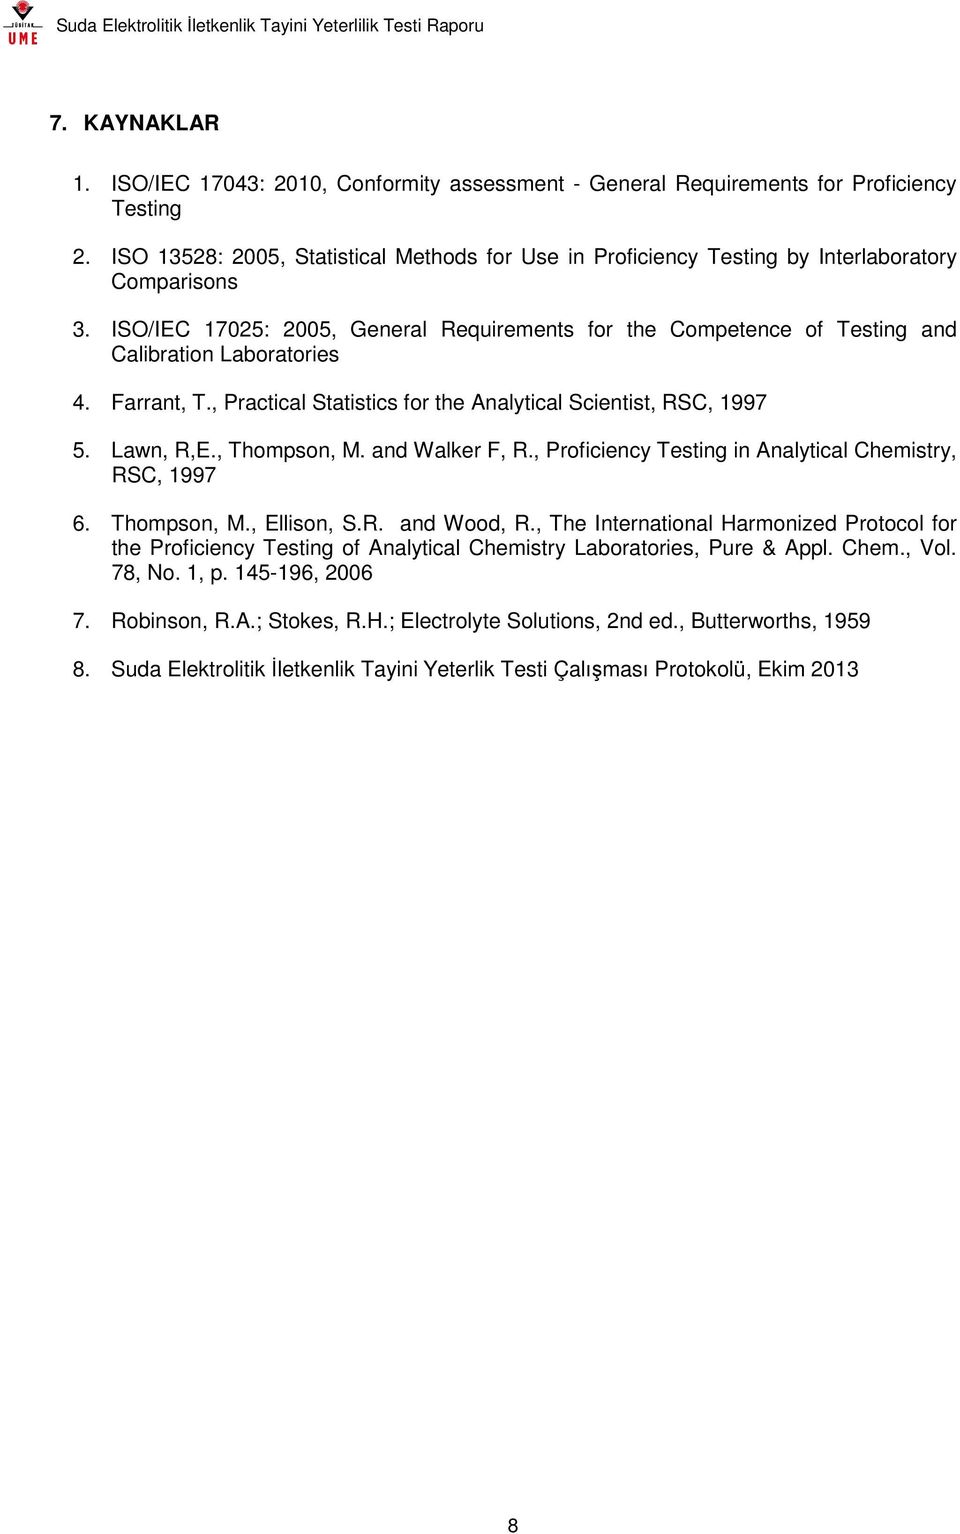 ISO/IEC 17025: 2005, General Requirements for the Competence of Testing and Calibration Laboratories 4. Farrant, T., Practical Statistics for the Analytical Scientist, RSC, 1997 5. Lawn, R,E.